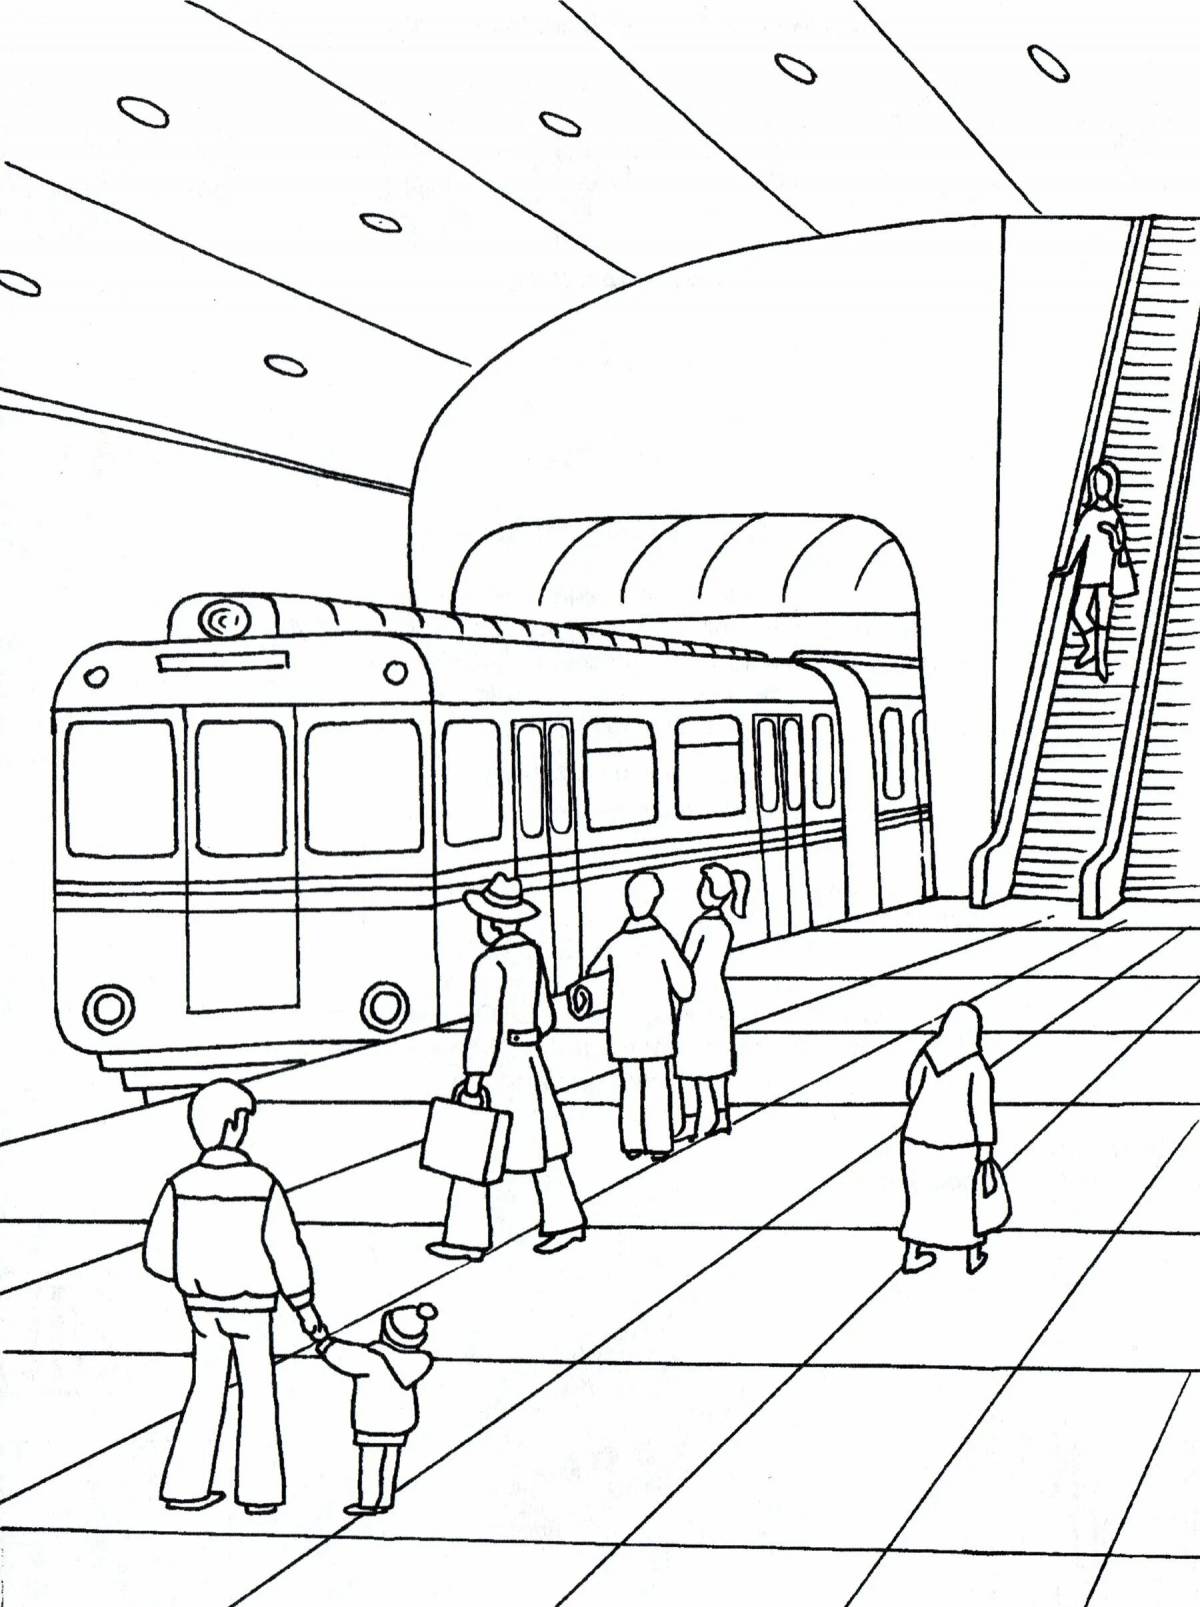 Amazing train station coloring pages for kids